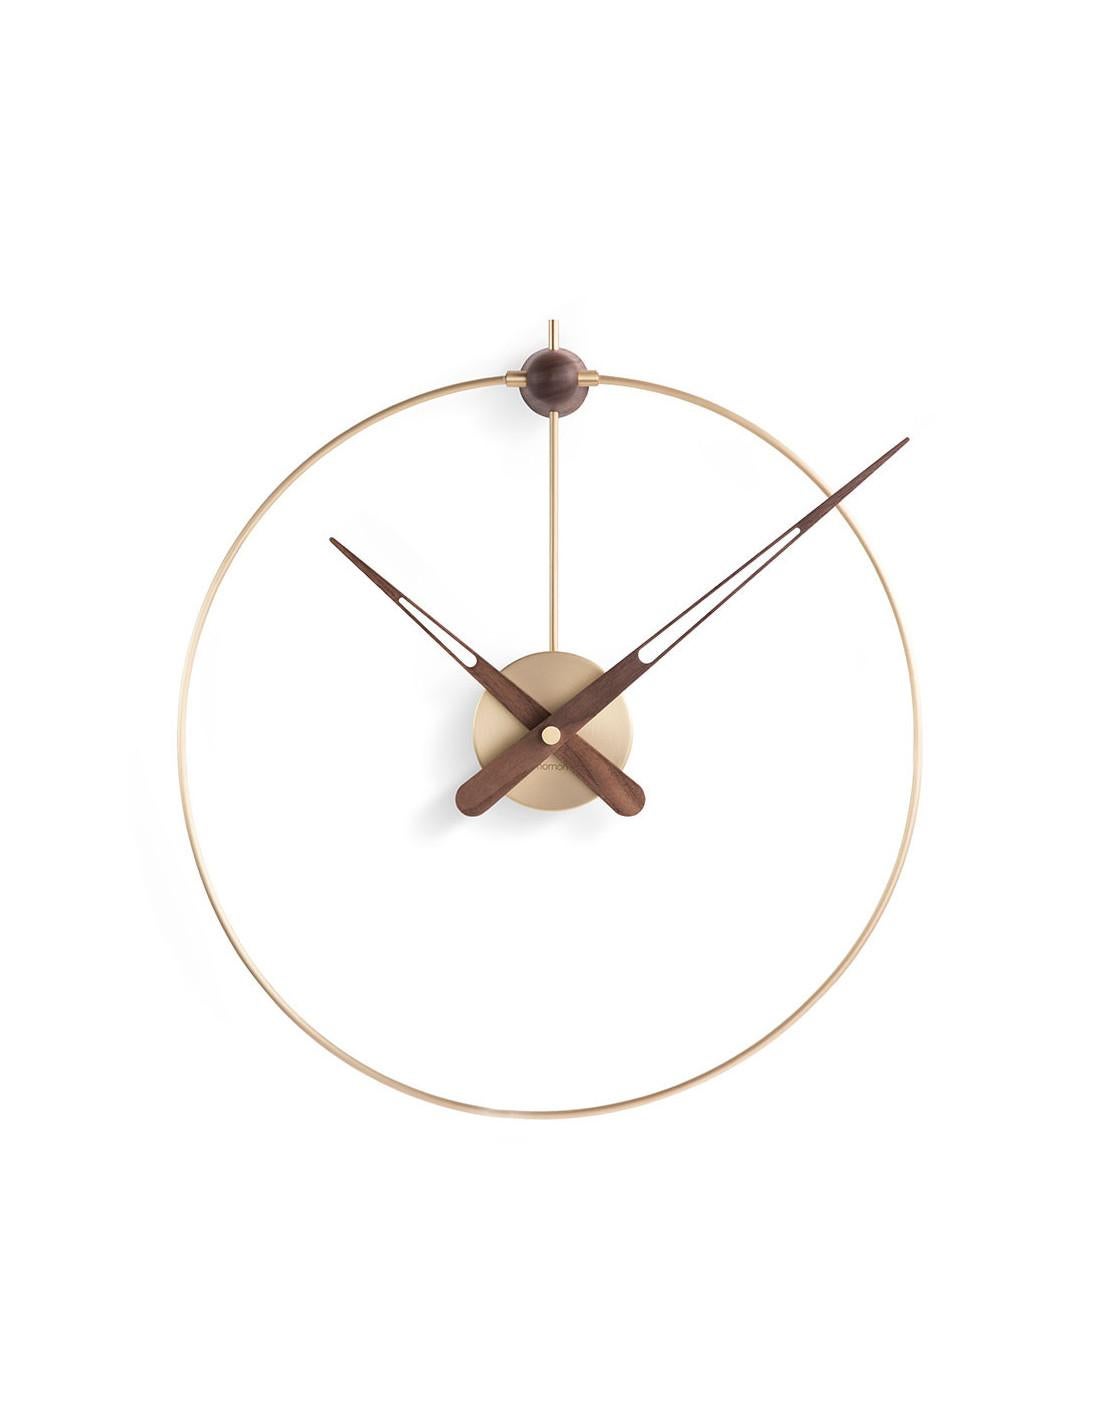 Micro Anda wall clock is one of the best models you can get on the market. It has a polished brass case and ring and walnut hands. Its diameter is 40 centimeters and its height is 50 cm. The UTS machinery is made of quartz and comes from Germany,